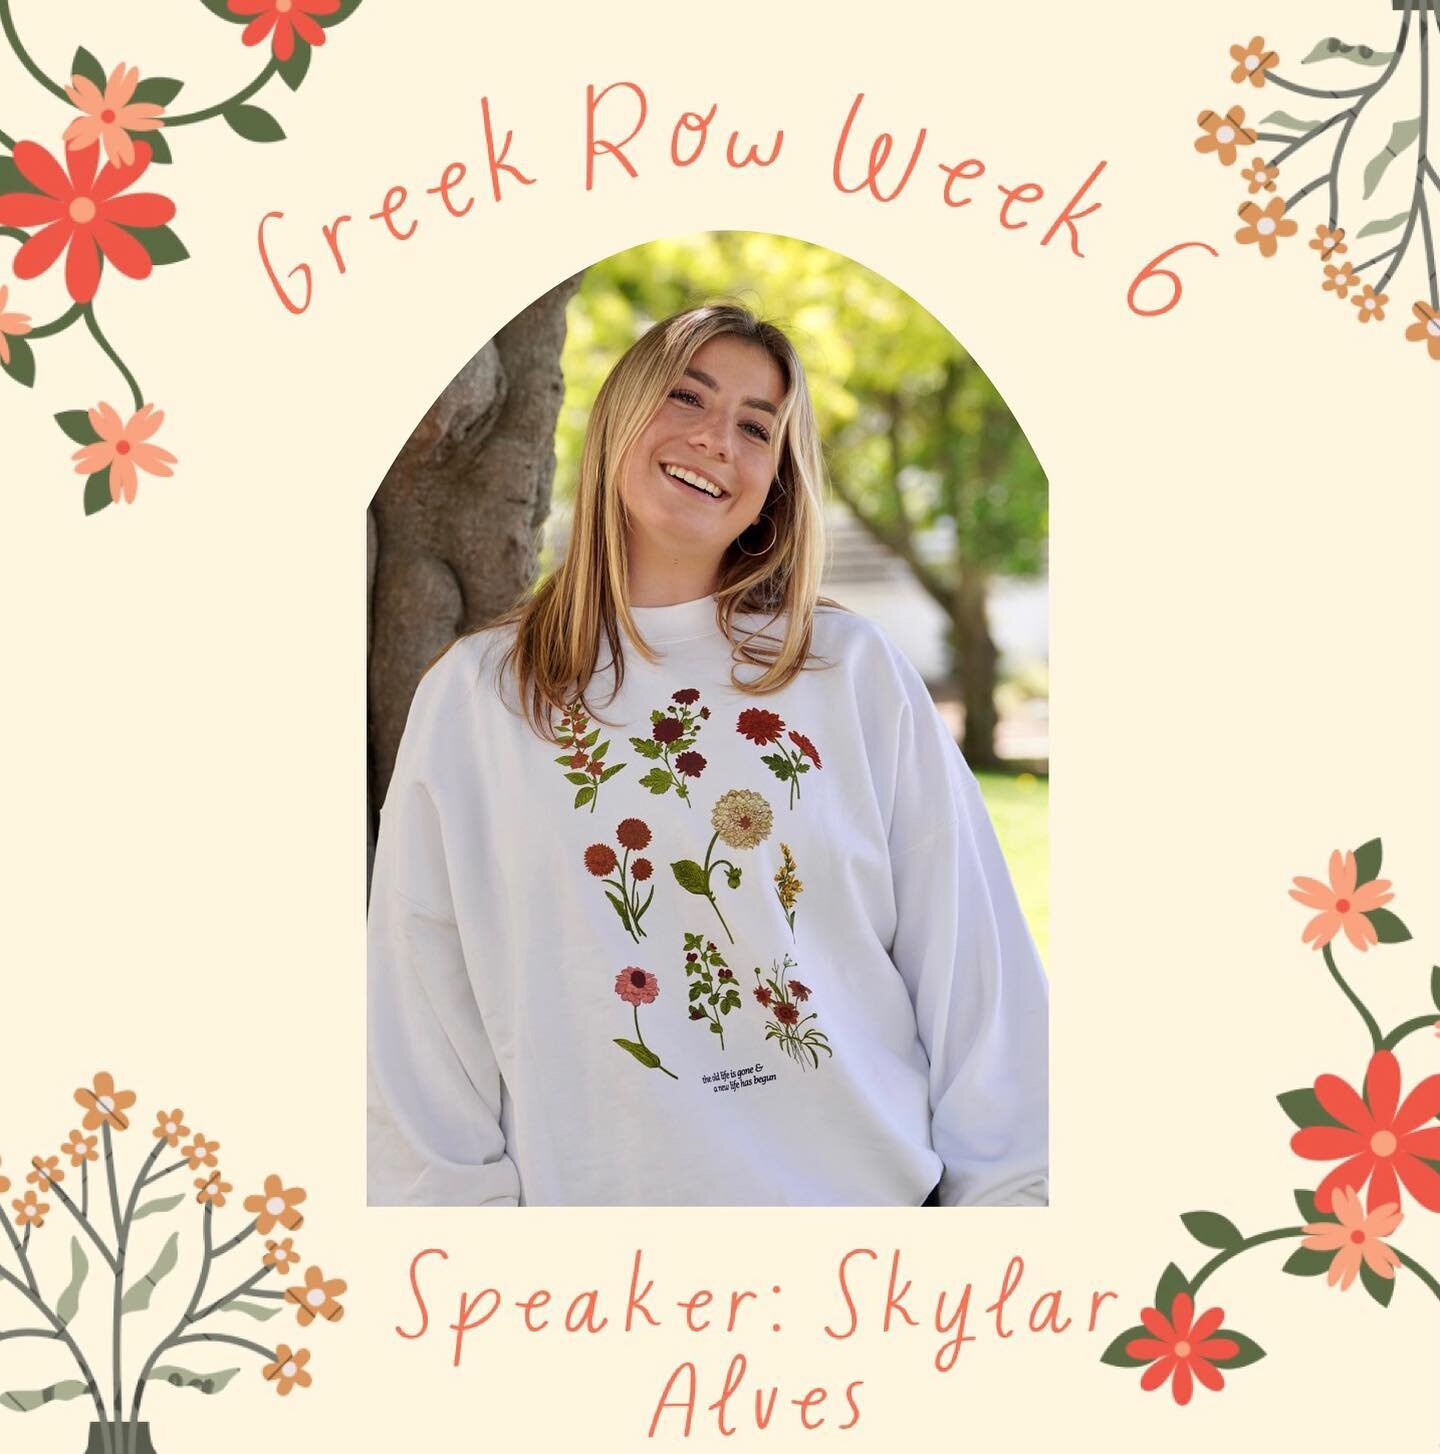 We hope to see ALL of your faces- old &amp; new- tonight, 8 pm, at Active Church! Skylar Alves, first year AXO member, will be sharing a beautiful message that you won&rsquo;t want to miss! We&rsquo;re super excited to hang out and connect tonight, D